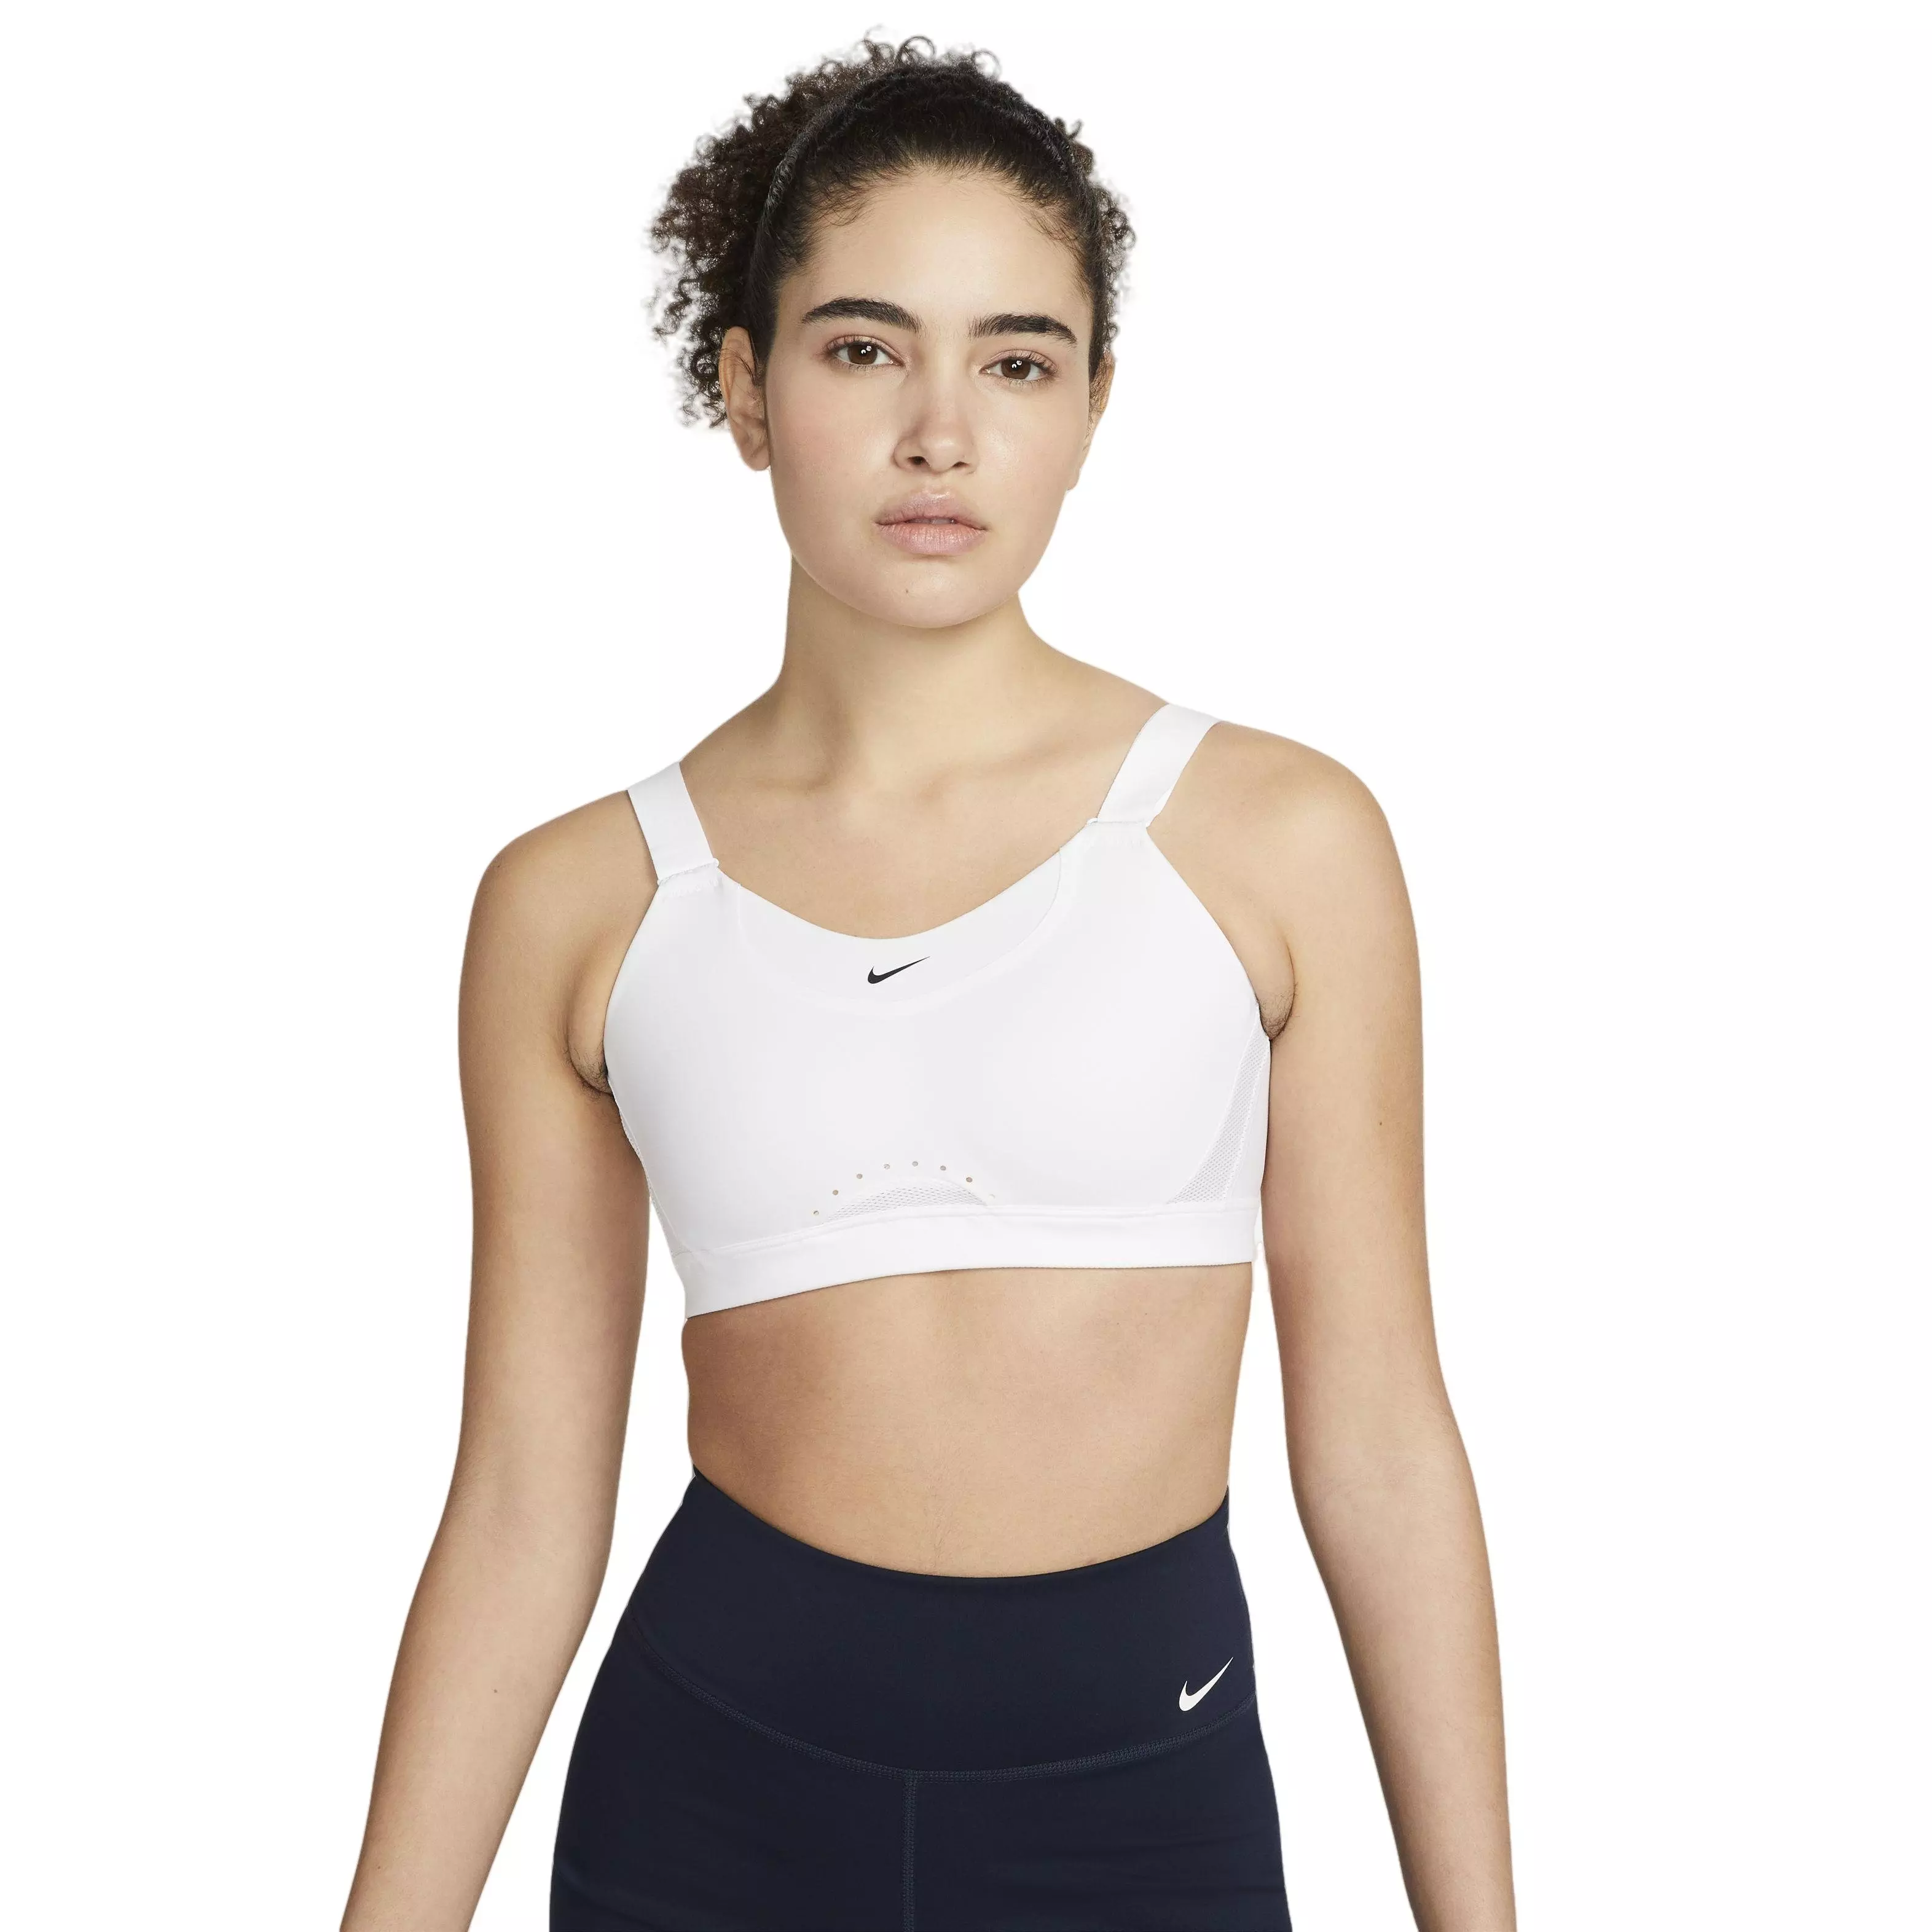 Women's High-Support Padded Adjustable Sports Bra